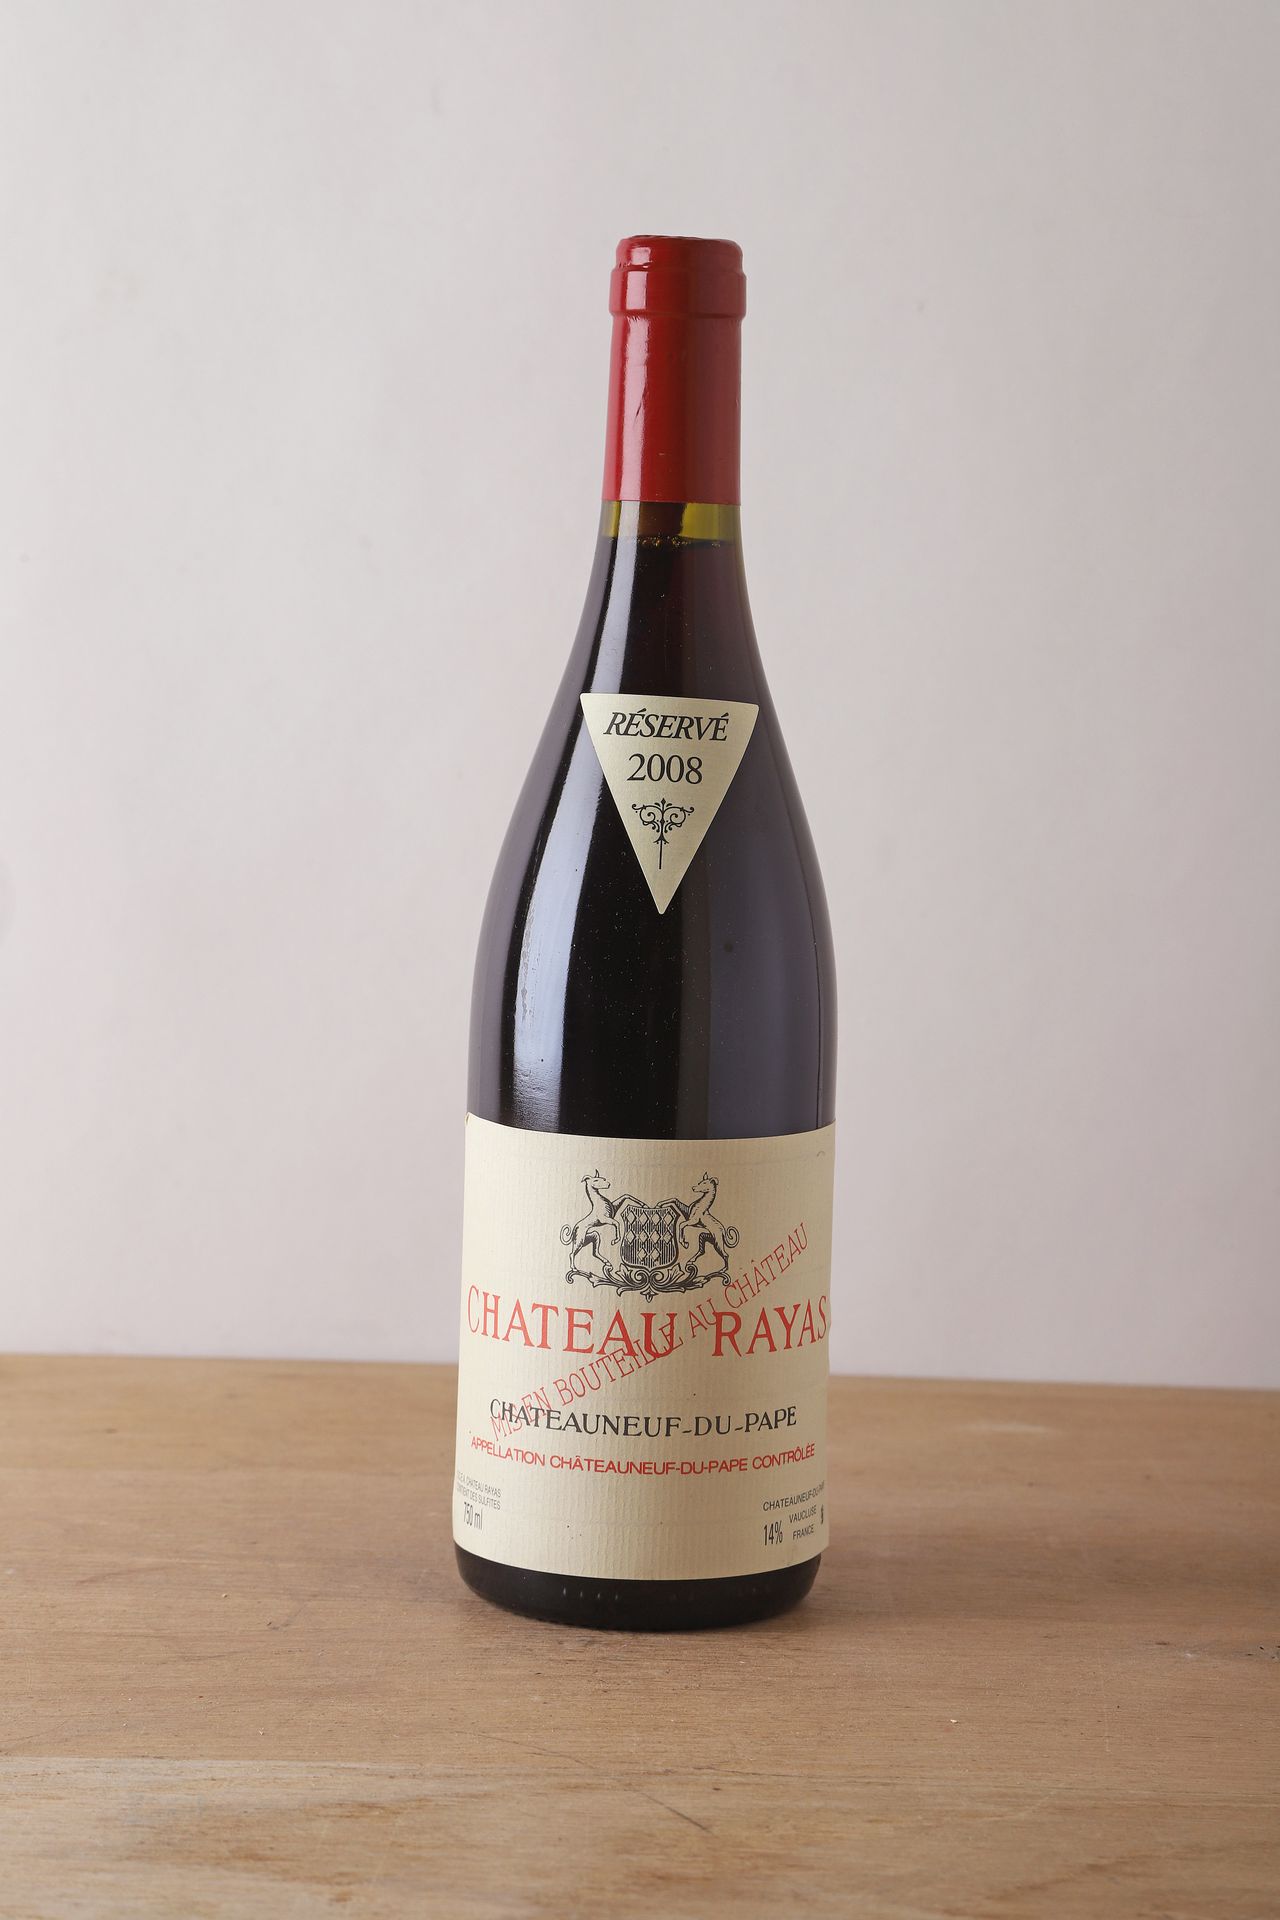 Null 1 B CHÂTEAUNEUF DU PAPE红葡萄酒 - 2008 - Rayas酒庄